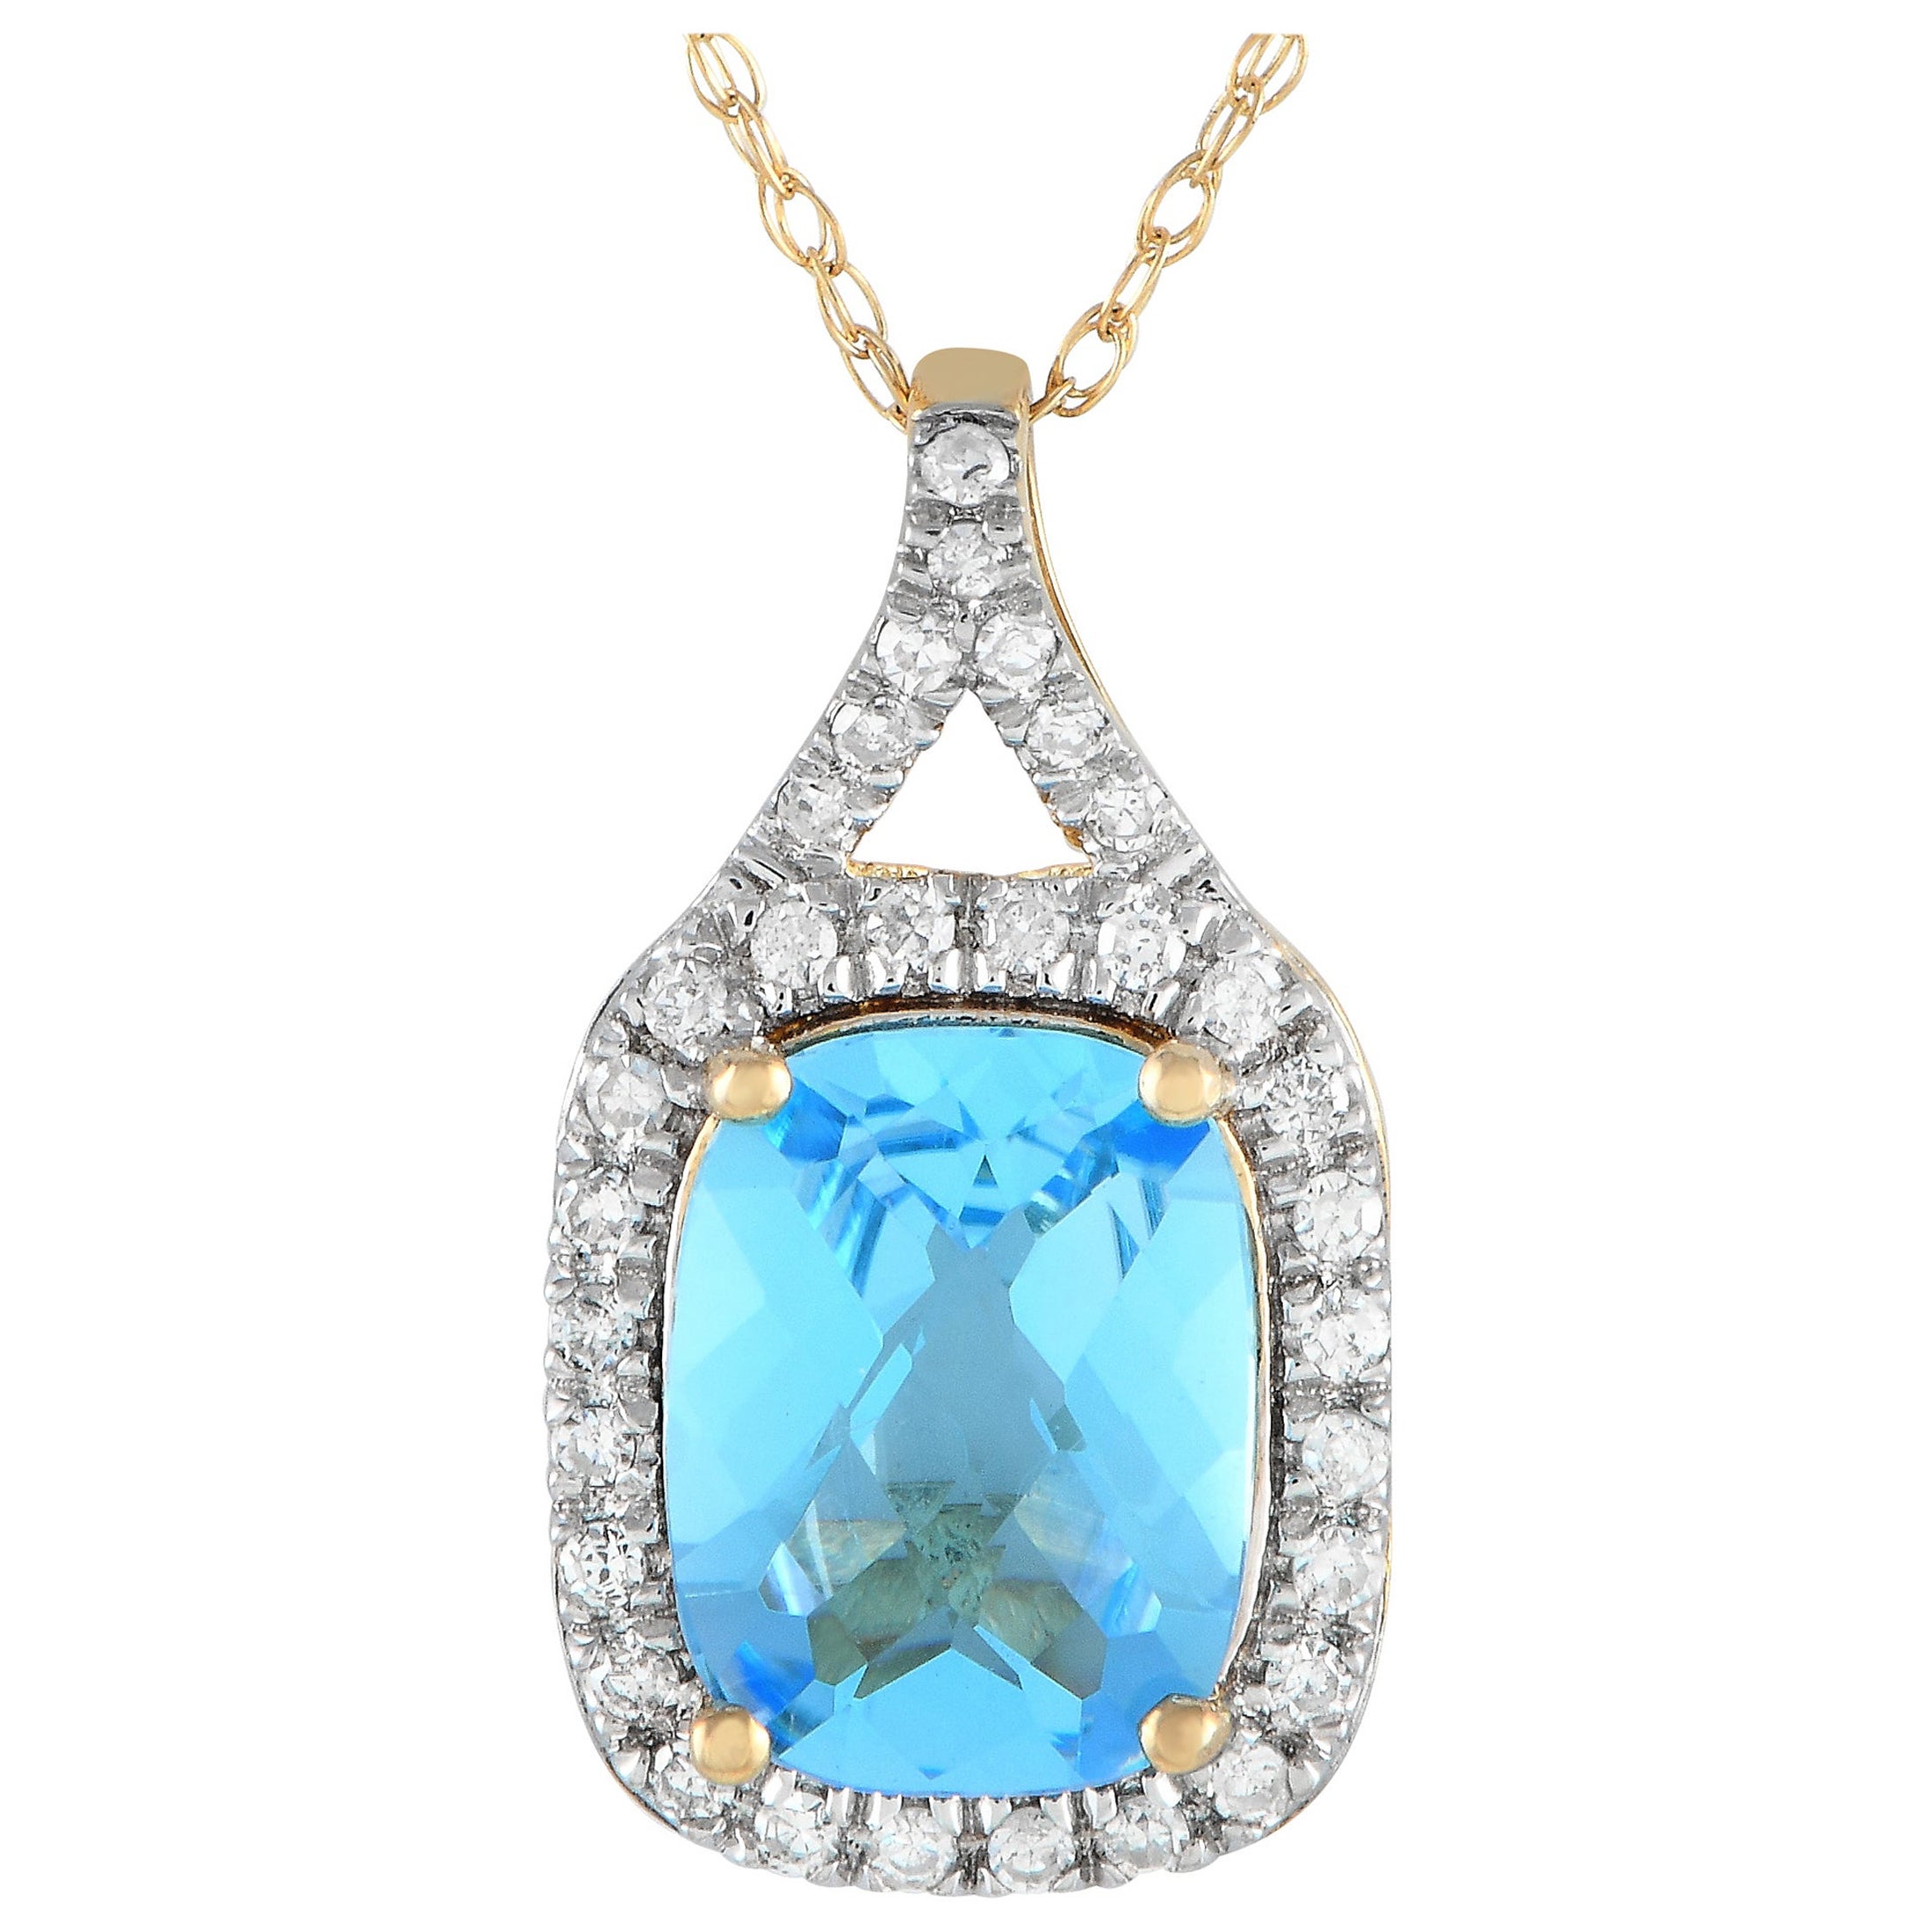 LB Exclusive 14K Yellow Gold 0.13ct Diamond and Blue Topaz Necklace PD4-15472YBT For Sale